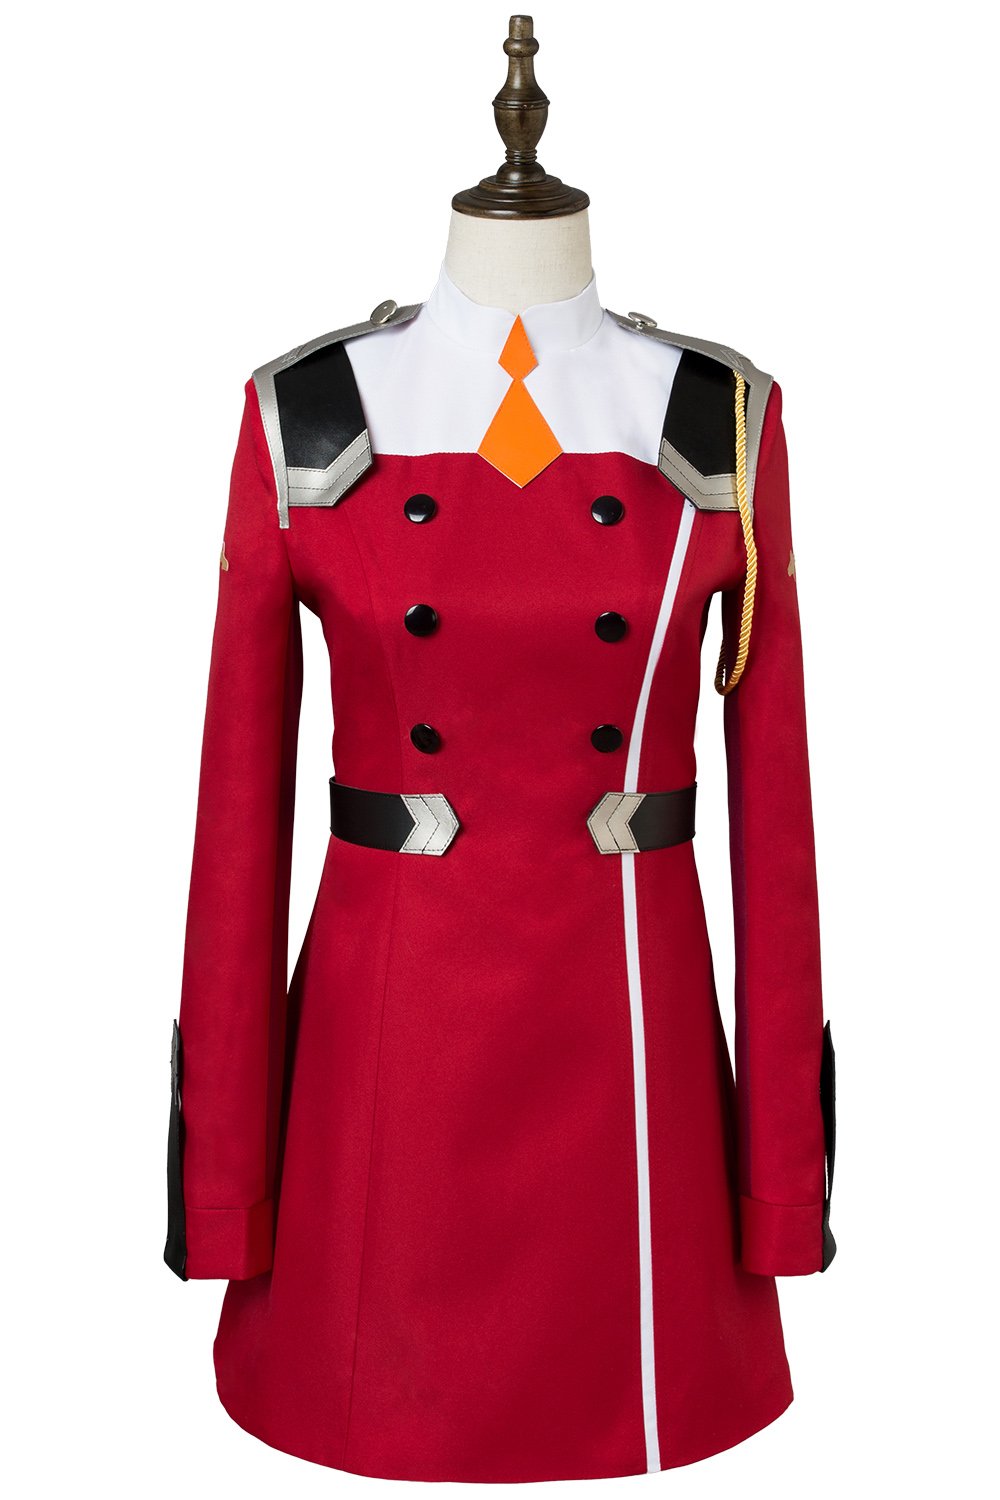 DARLING in the FRANXX Zero Two Code:002 Uniform Dress Cosplay Costume Red